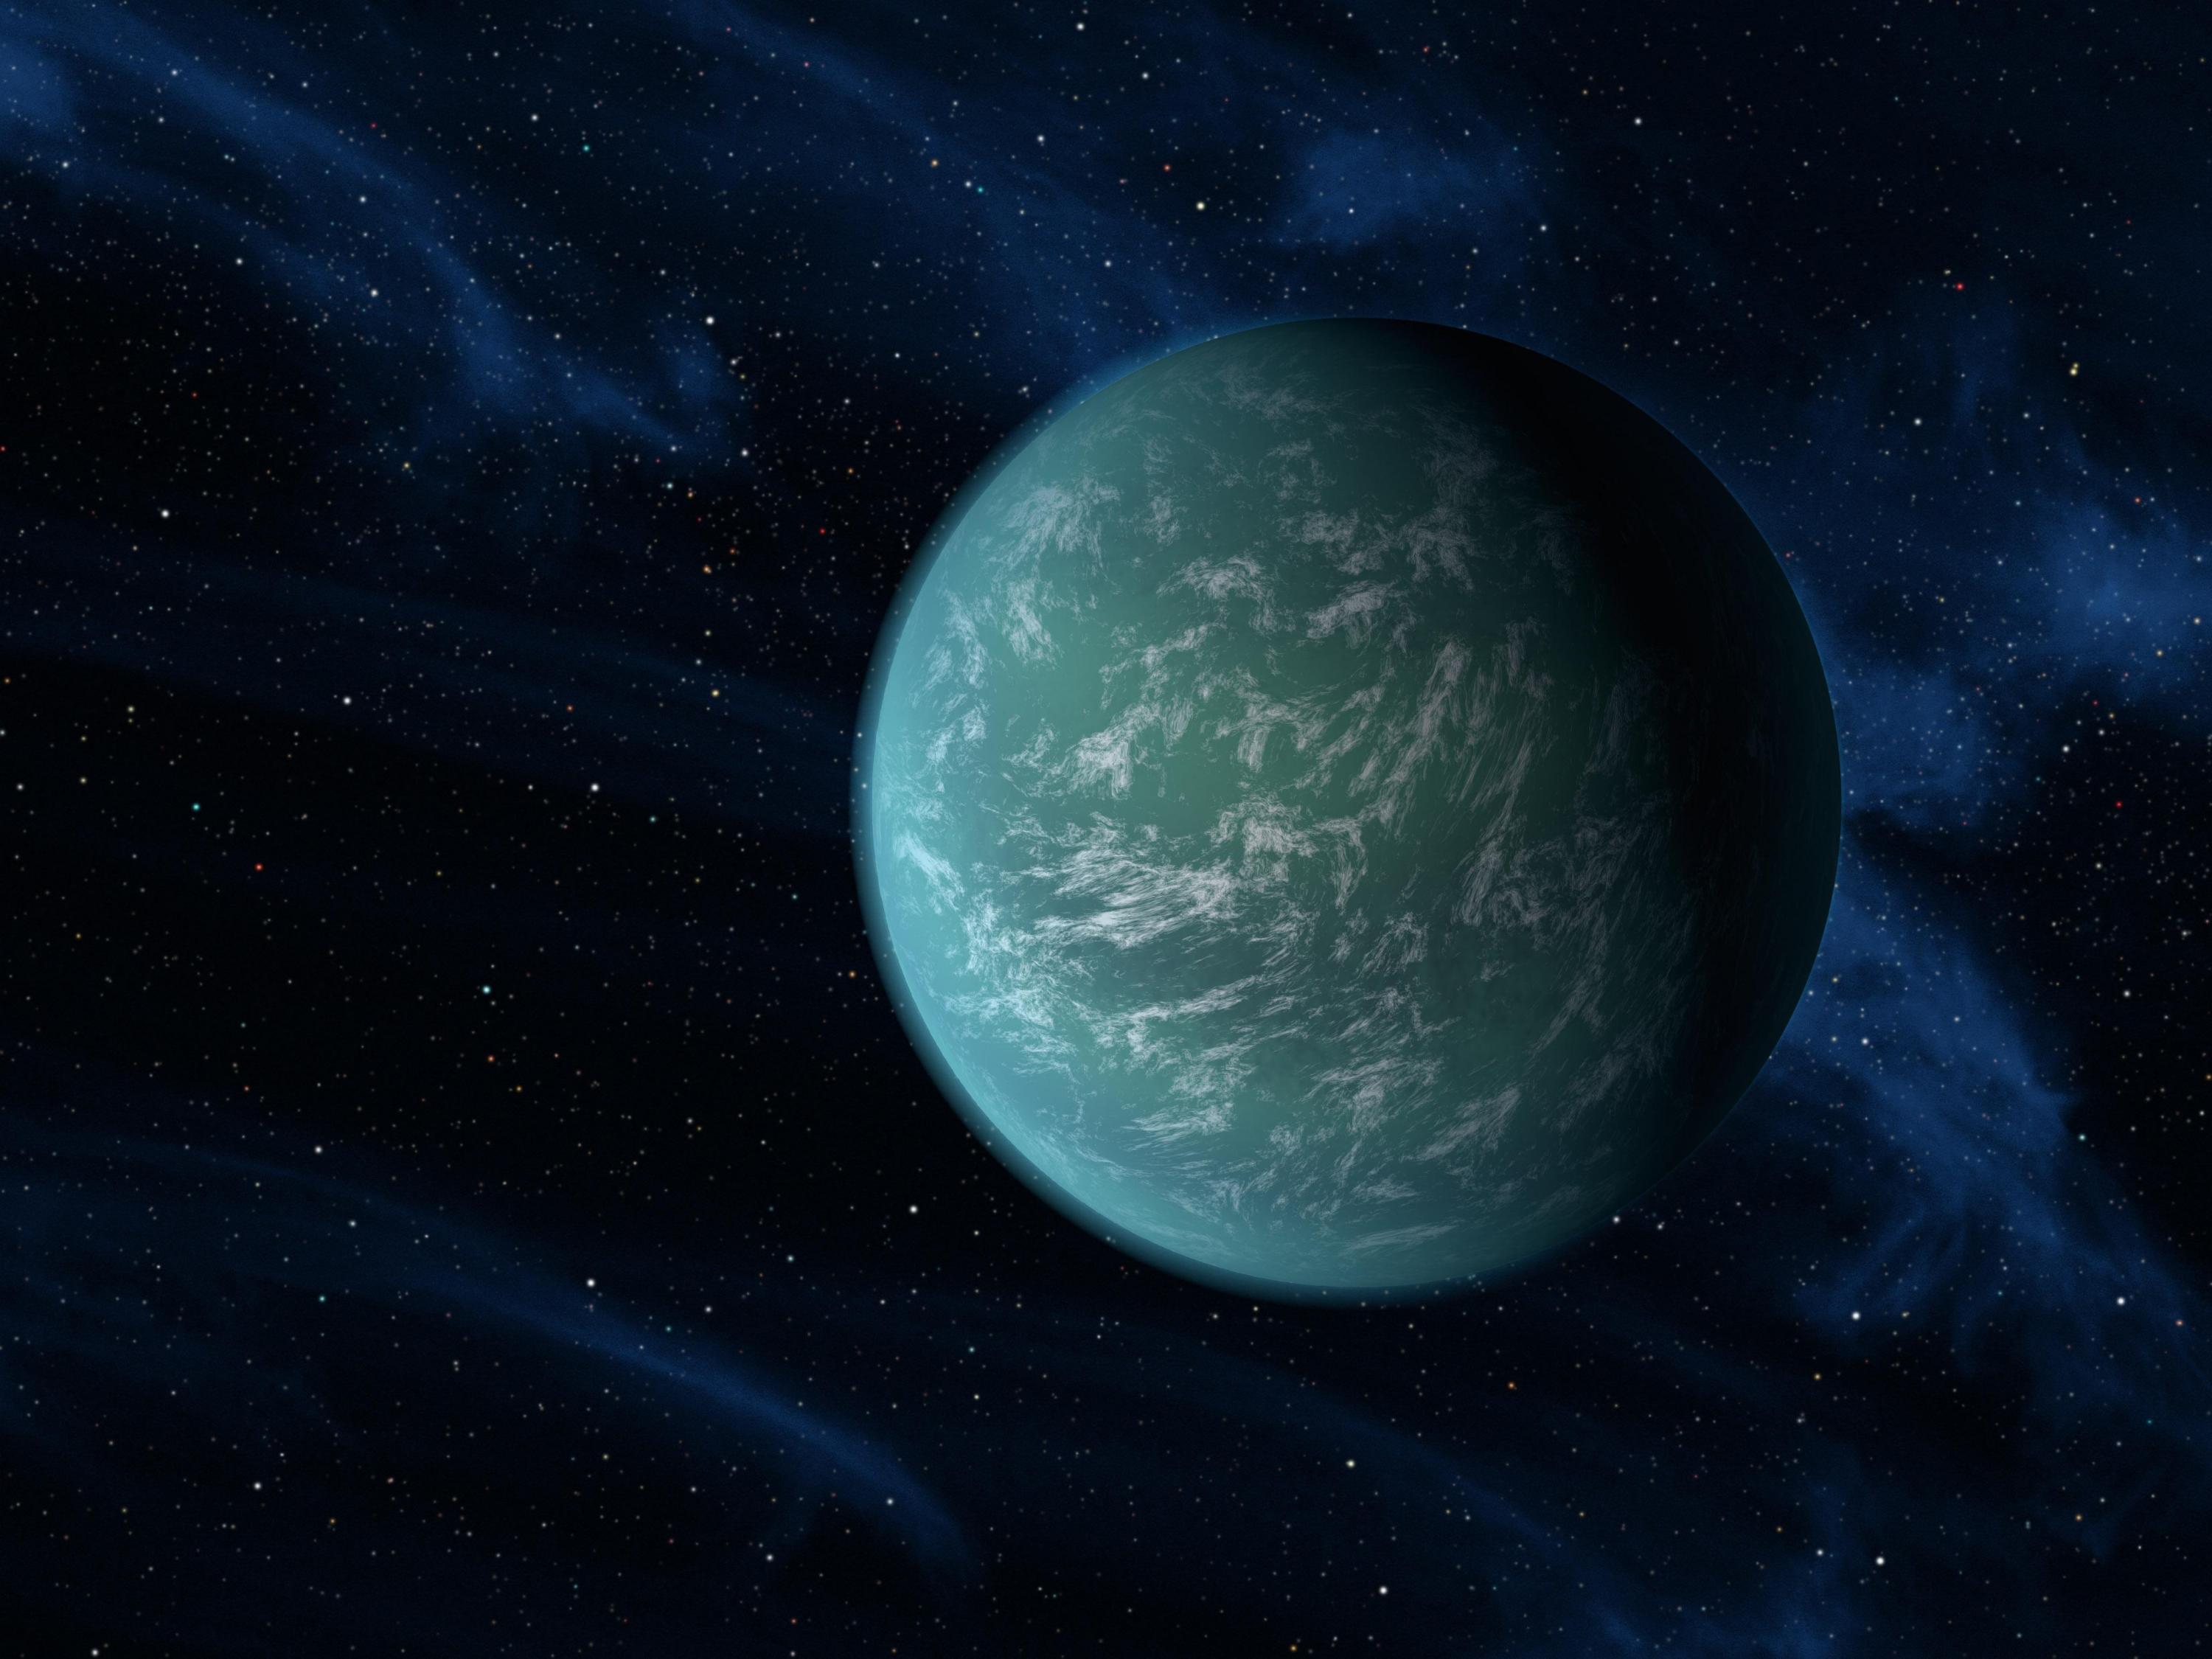 Artist's depiction of what exoplanet Kepler 22b might look like. It was discovered by the Kepler satellite telescope. Kepler 22b likely receives a similar amount of light and heat from its star as our Earth does from our sun. Credit: NASA/Ames/JPL-Caltech 